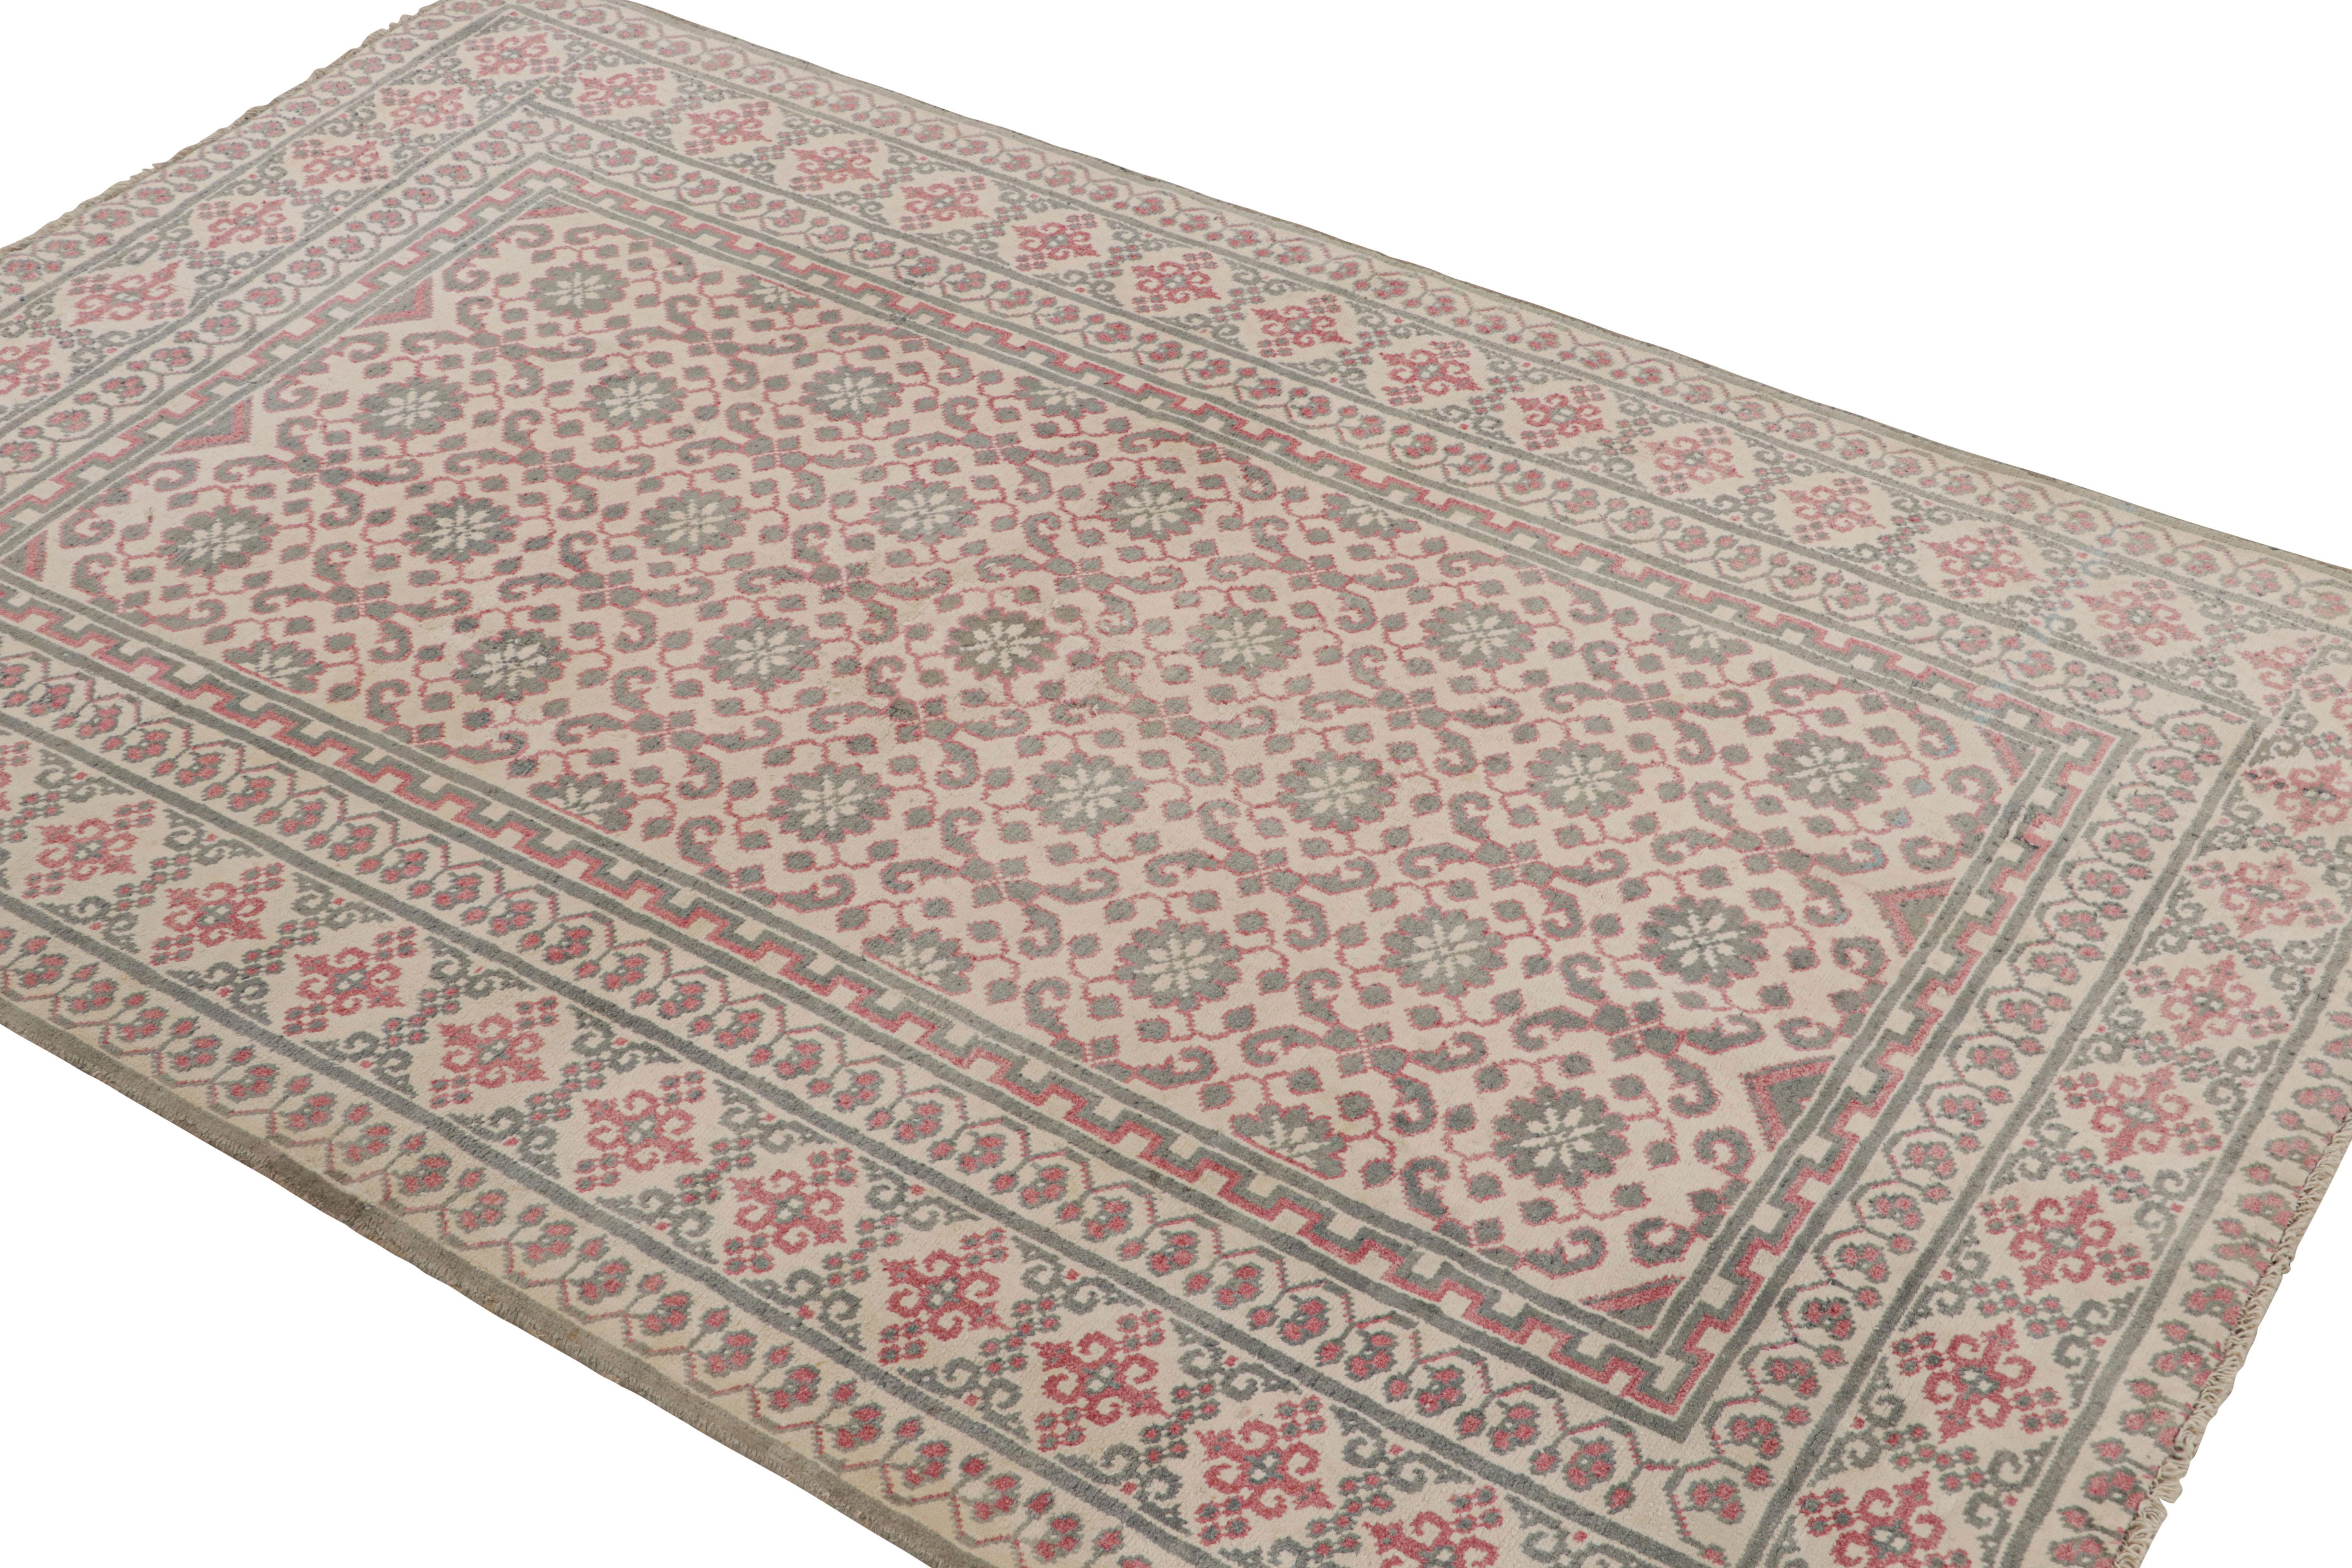 Hand-Knotted Antique Agra Rug in Cream with Gray and Red Floral Patterns, from Rug & Kilim For Sale